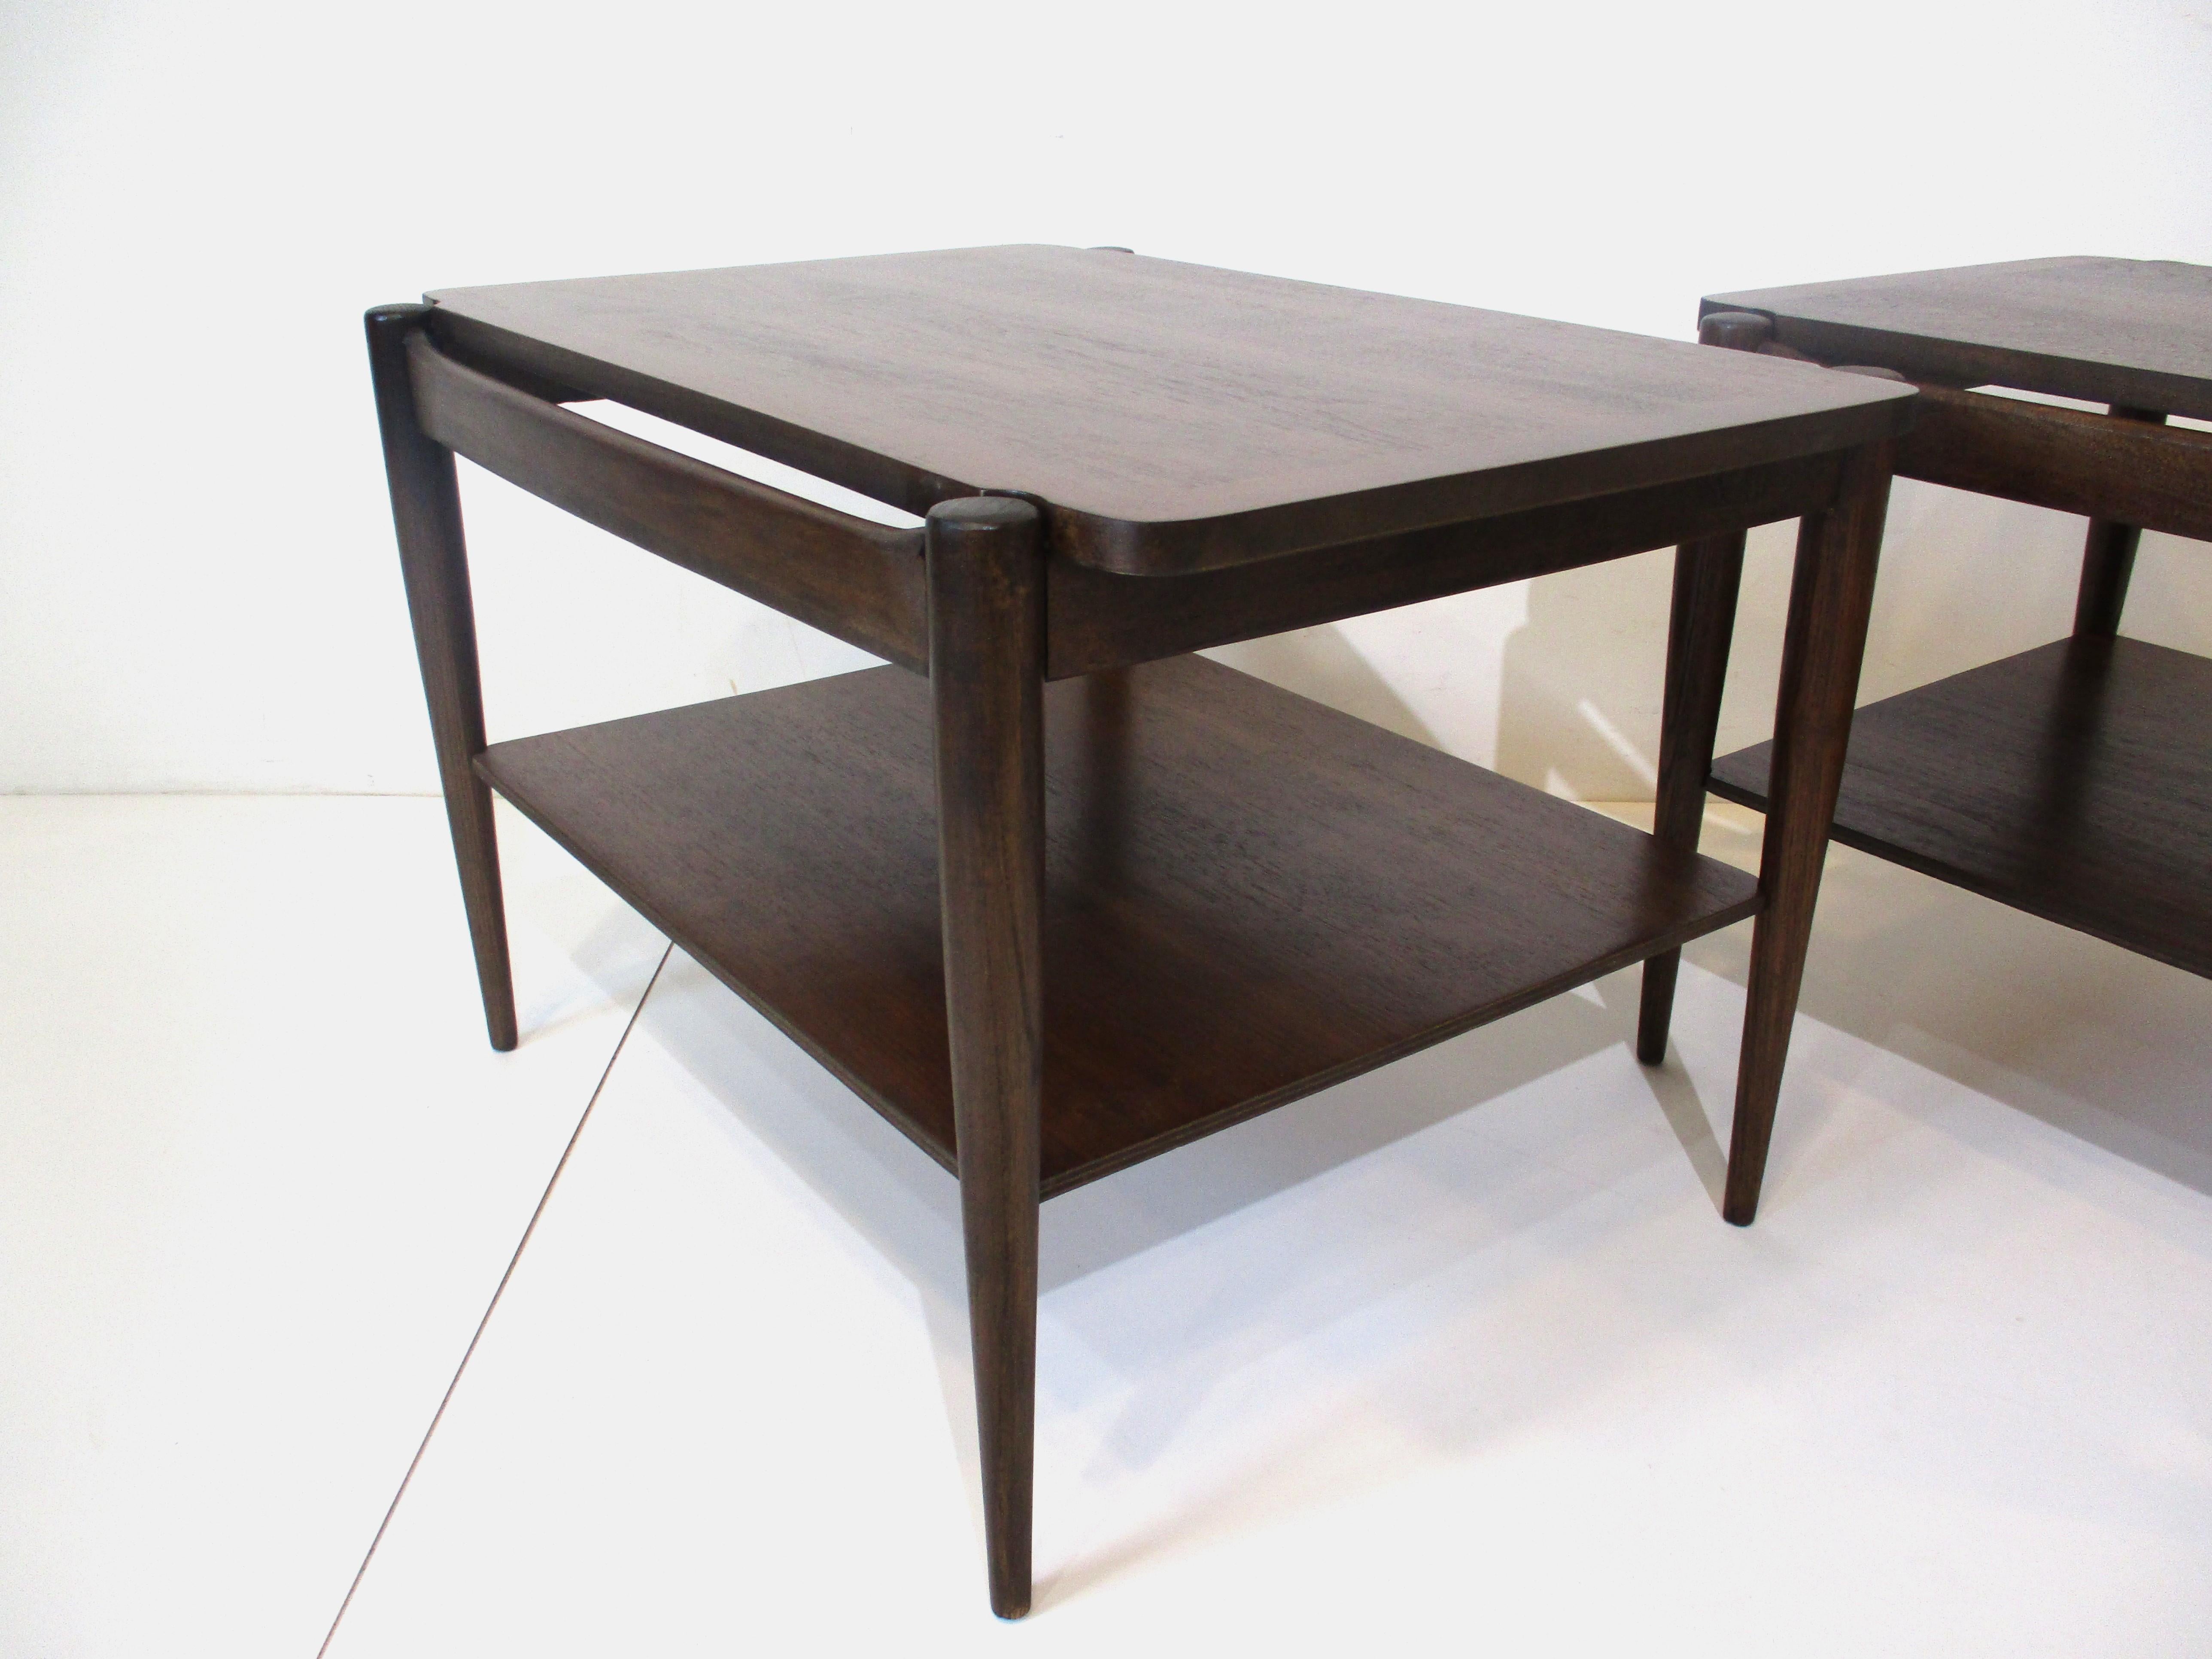 20th Century Midcentury Walnut End Tables by Bassett in the Style of Grete Jalk